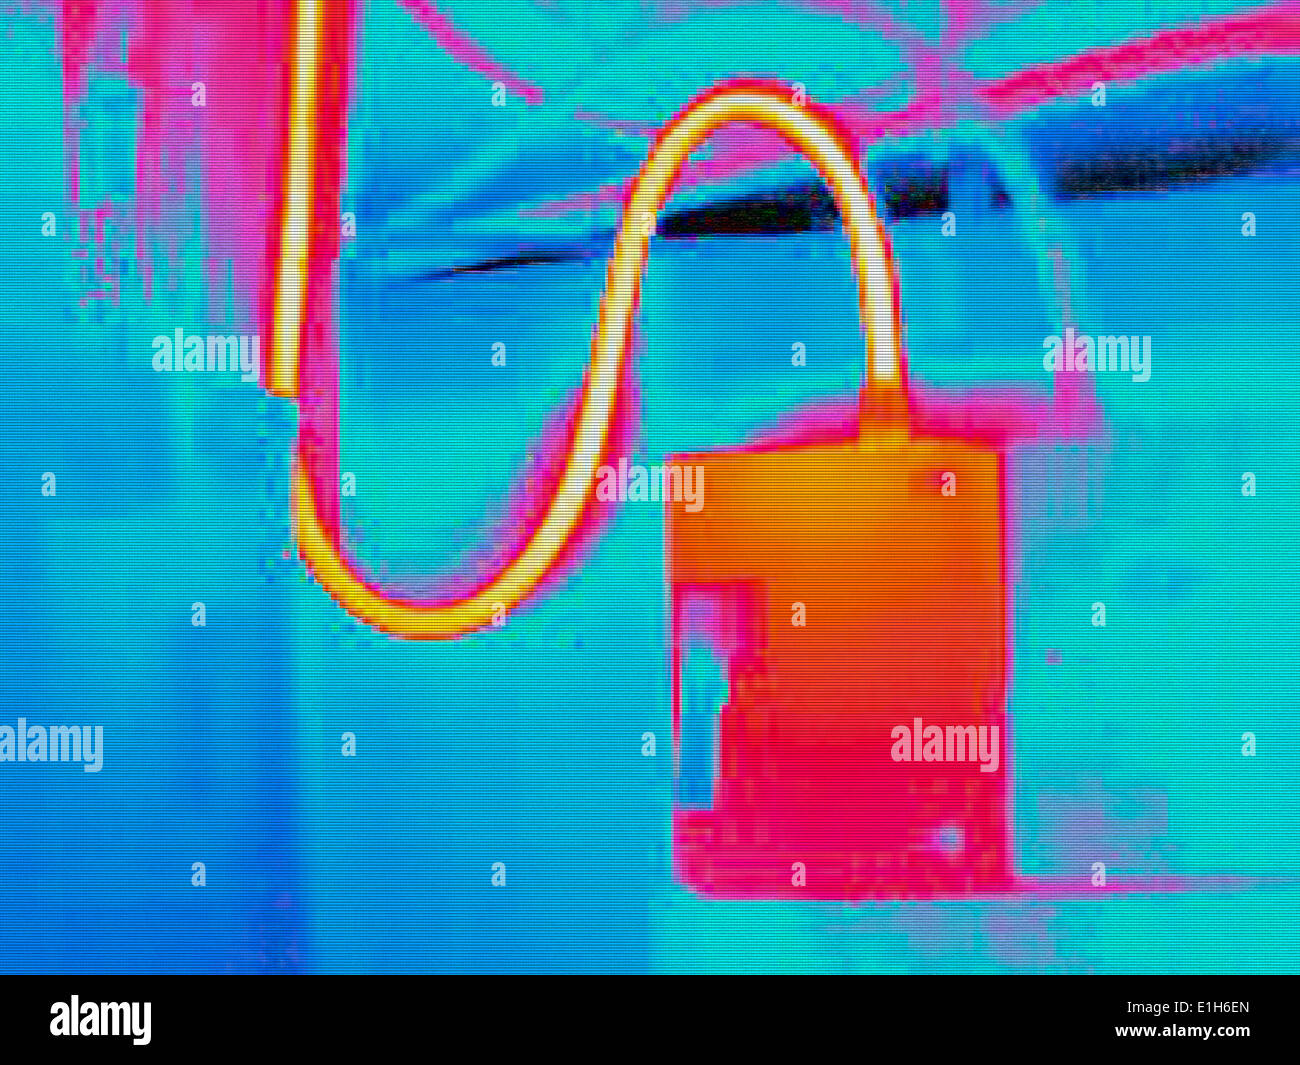 Infra red heat image of electricity supply cable and box Stock Photo